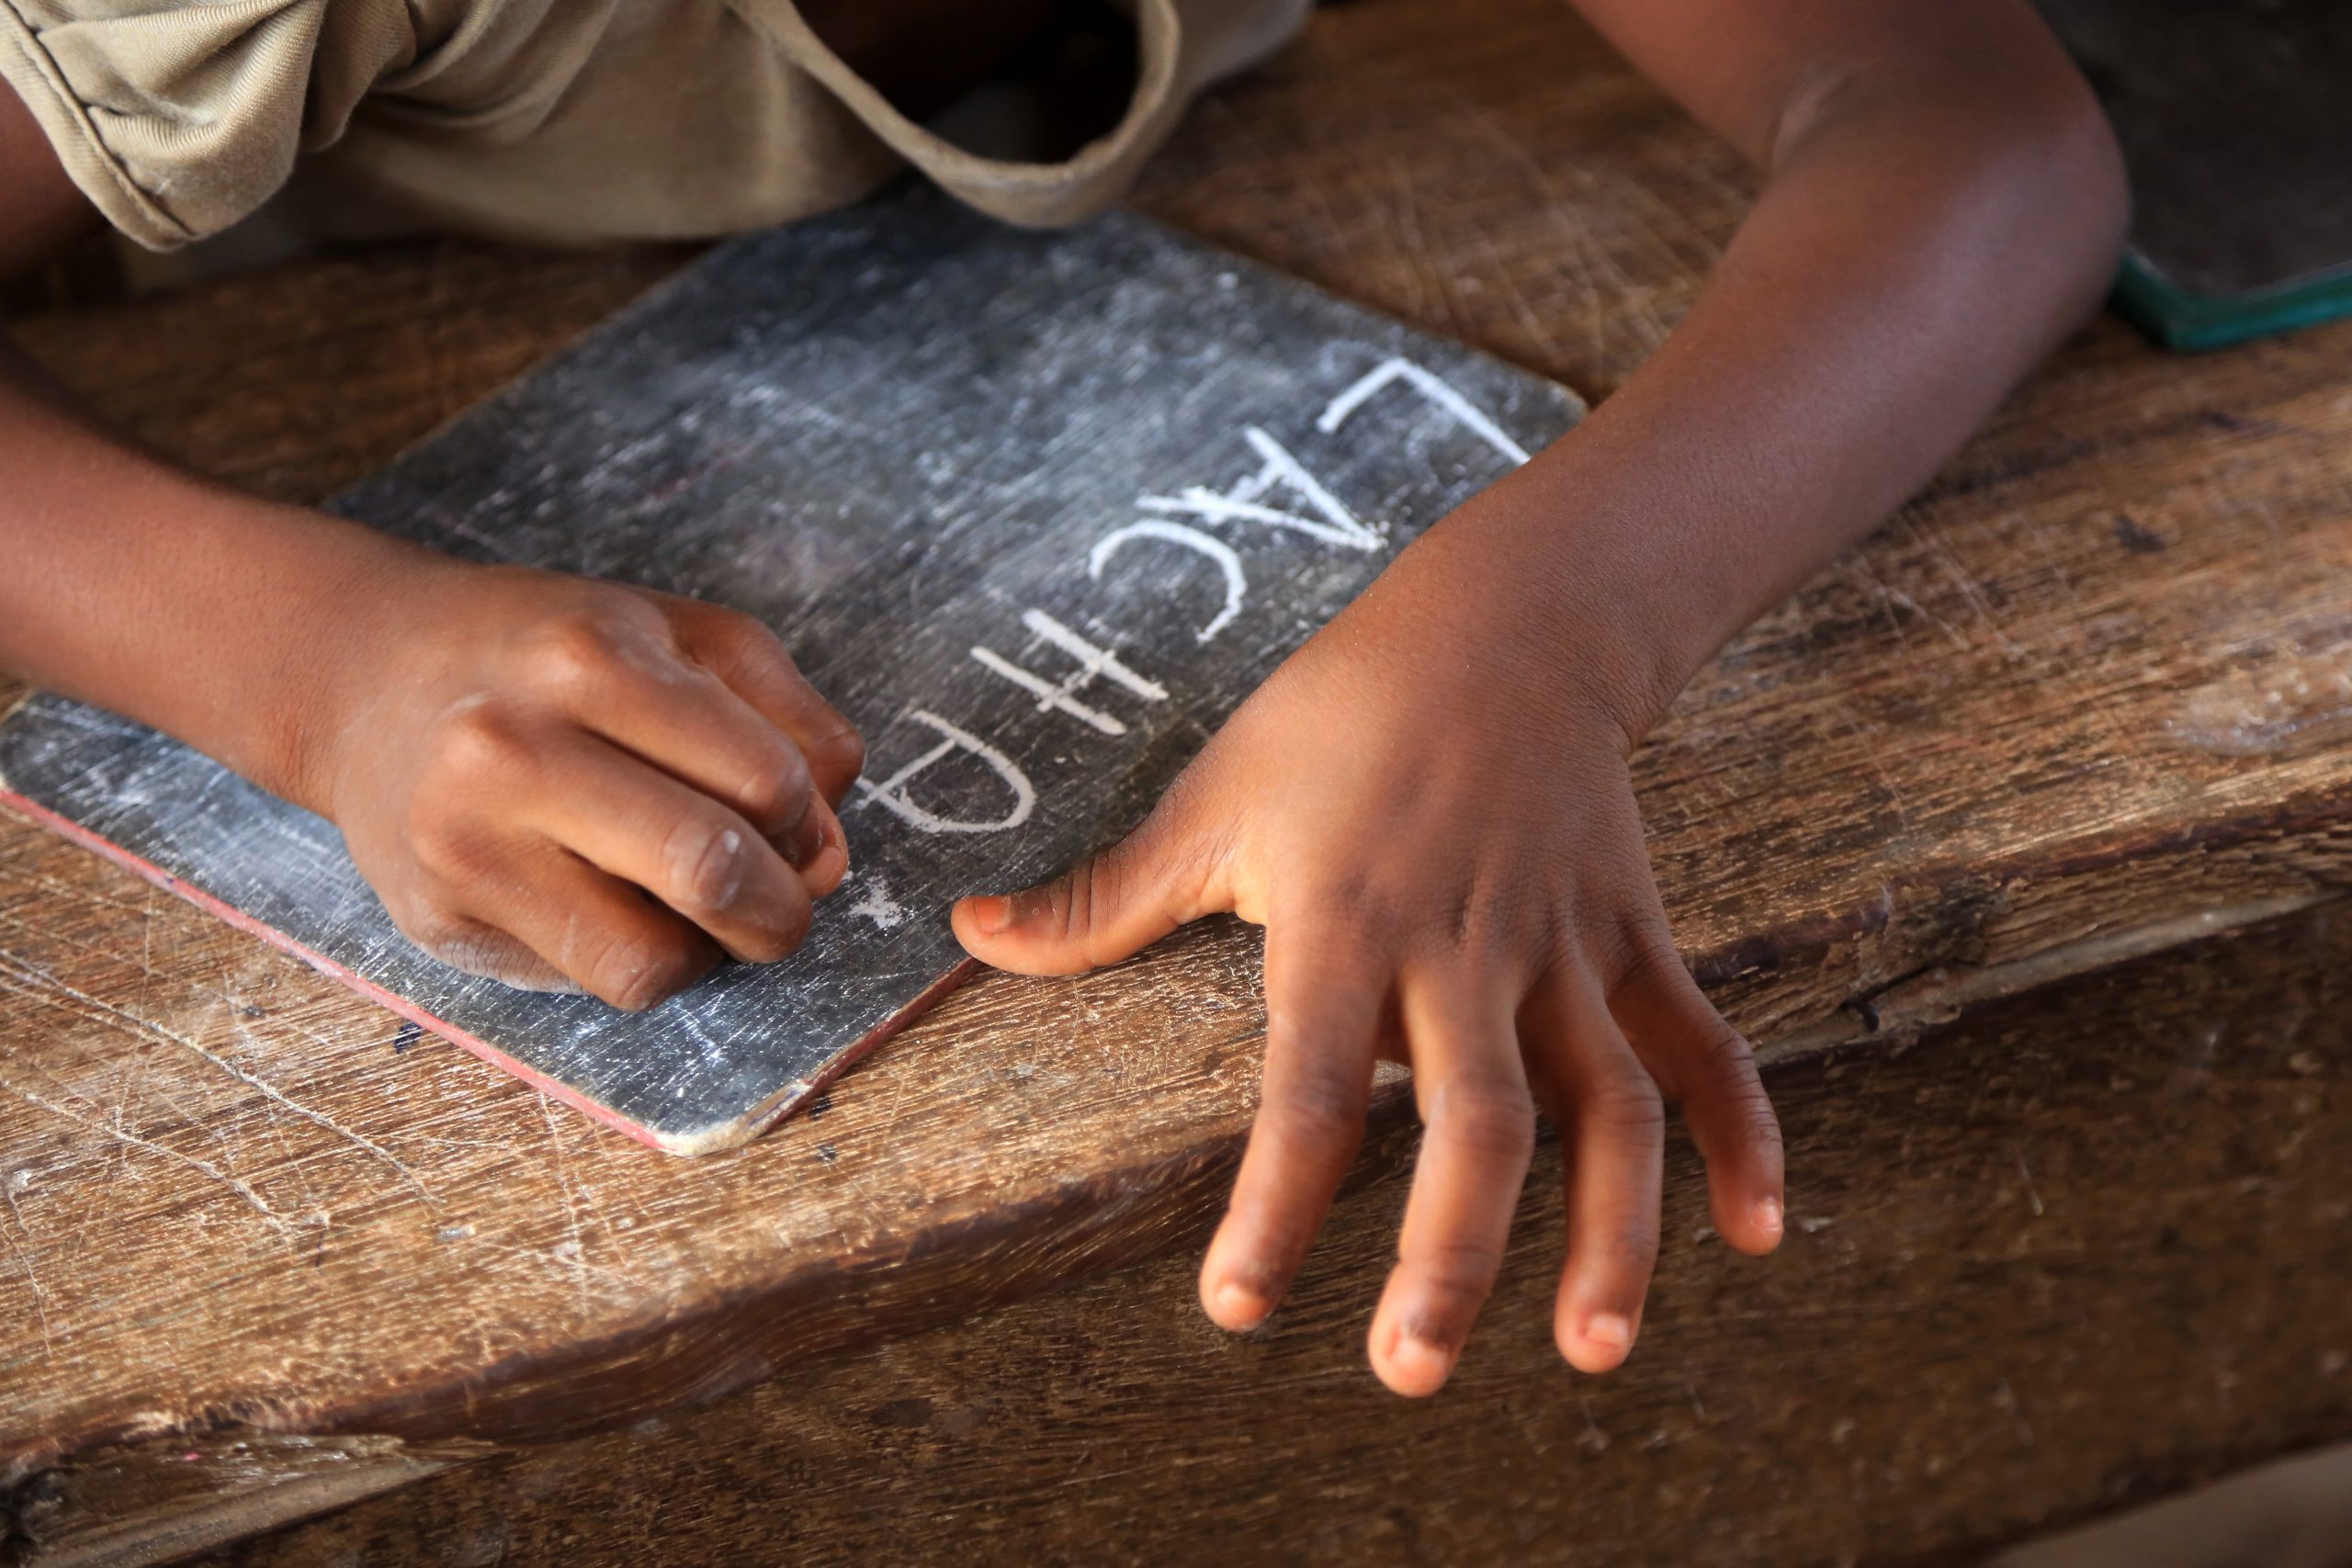 West Africa. Togo. Lome. 01/23/2014. This colorful image depicts a primary school student writing with chalk on a blackboard.